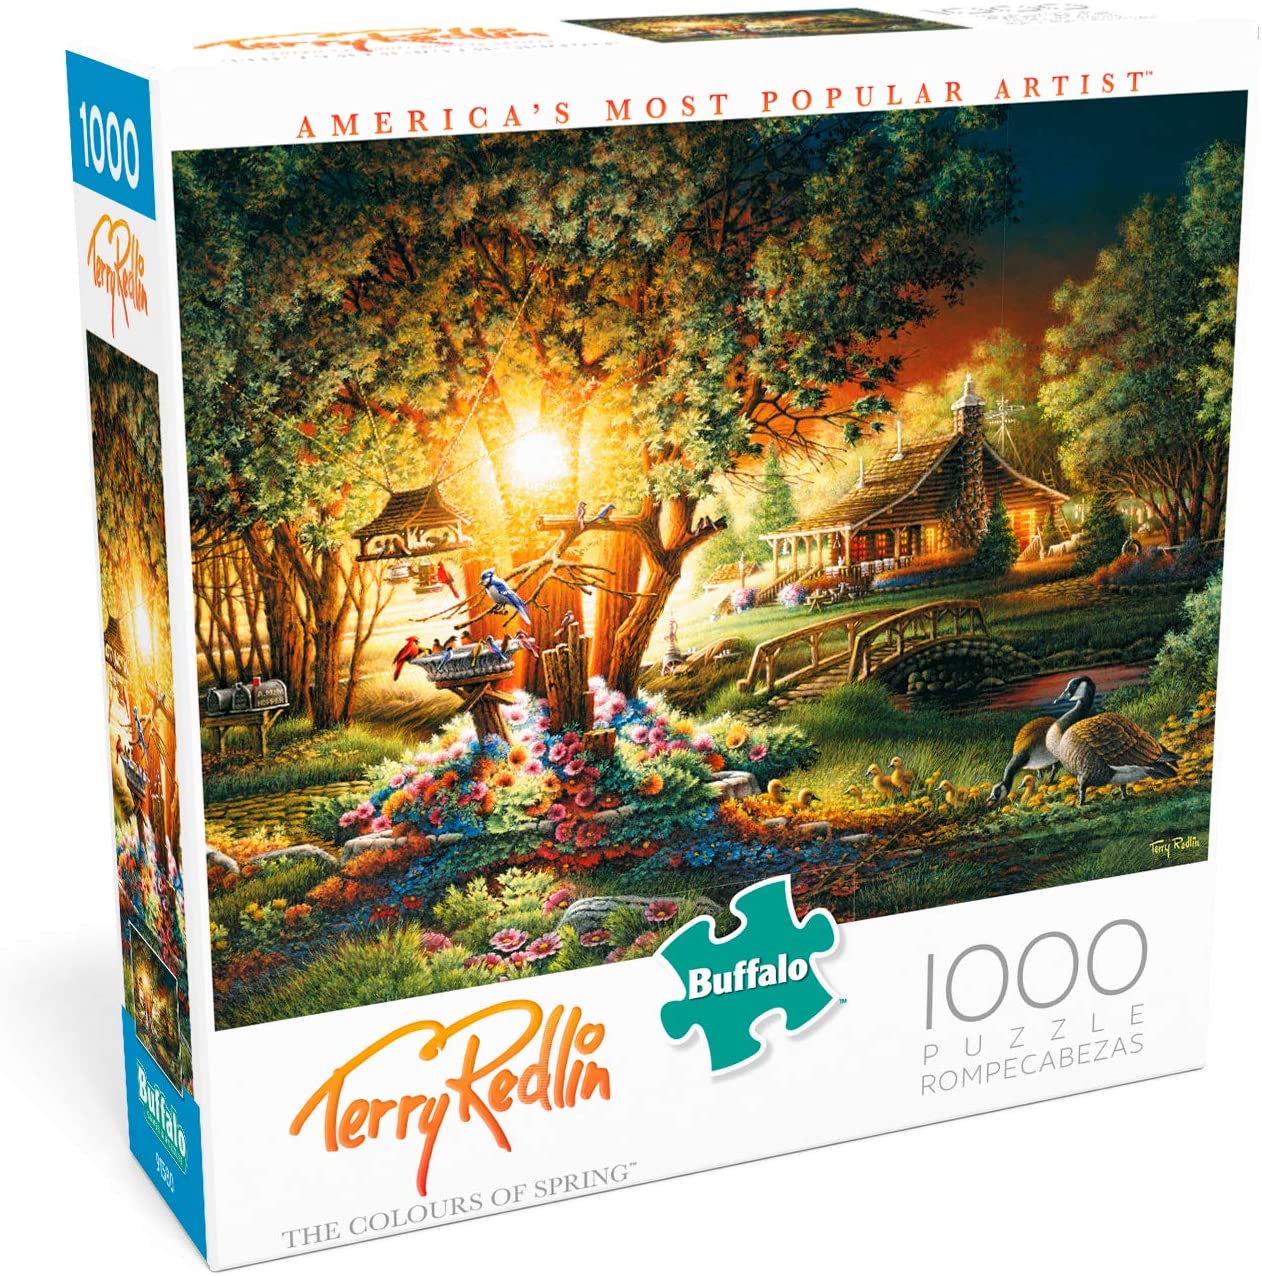 1000-Piece Buffalo Games Terry Redlin Colours of Spring Jigsaw Puzzle $4.90 + Free Shipping w/ Prime or orders $25+